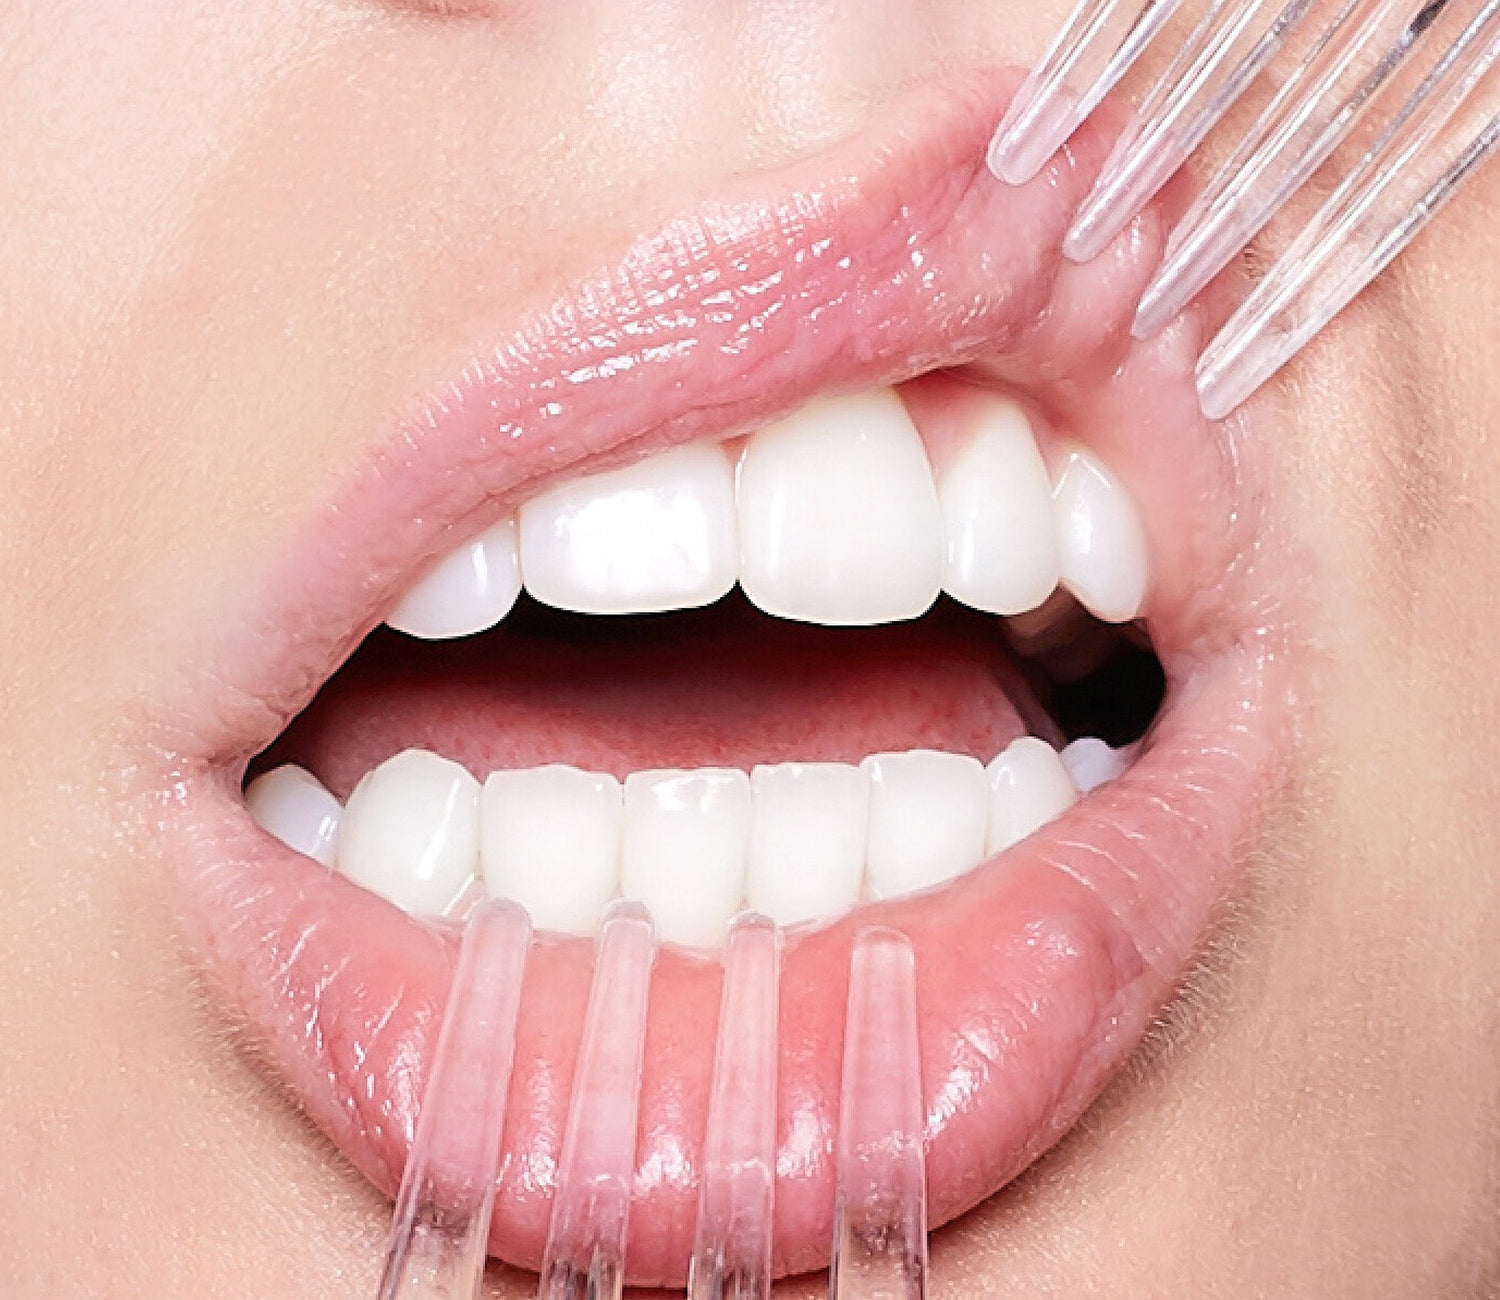 8 worst foods for your teeth